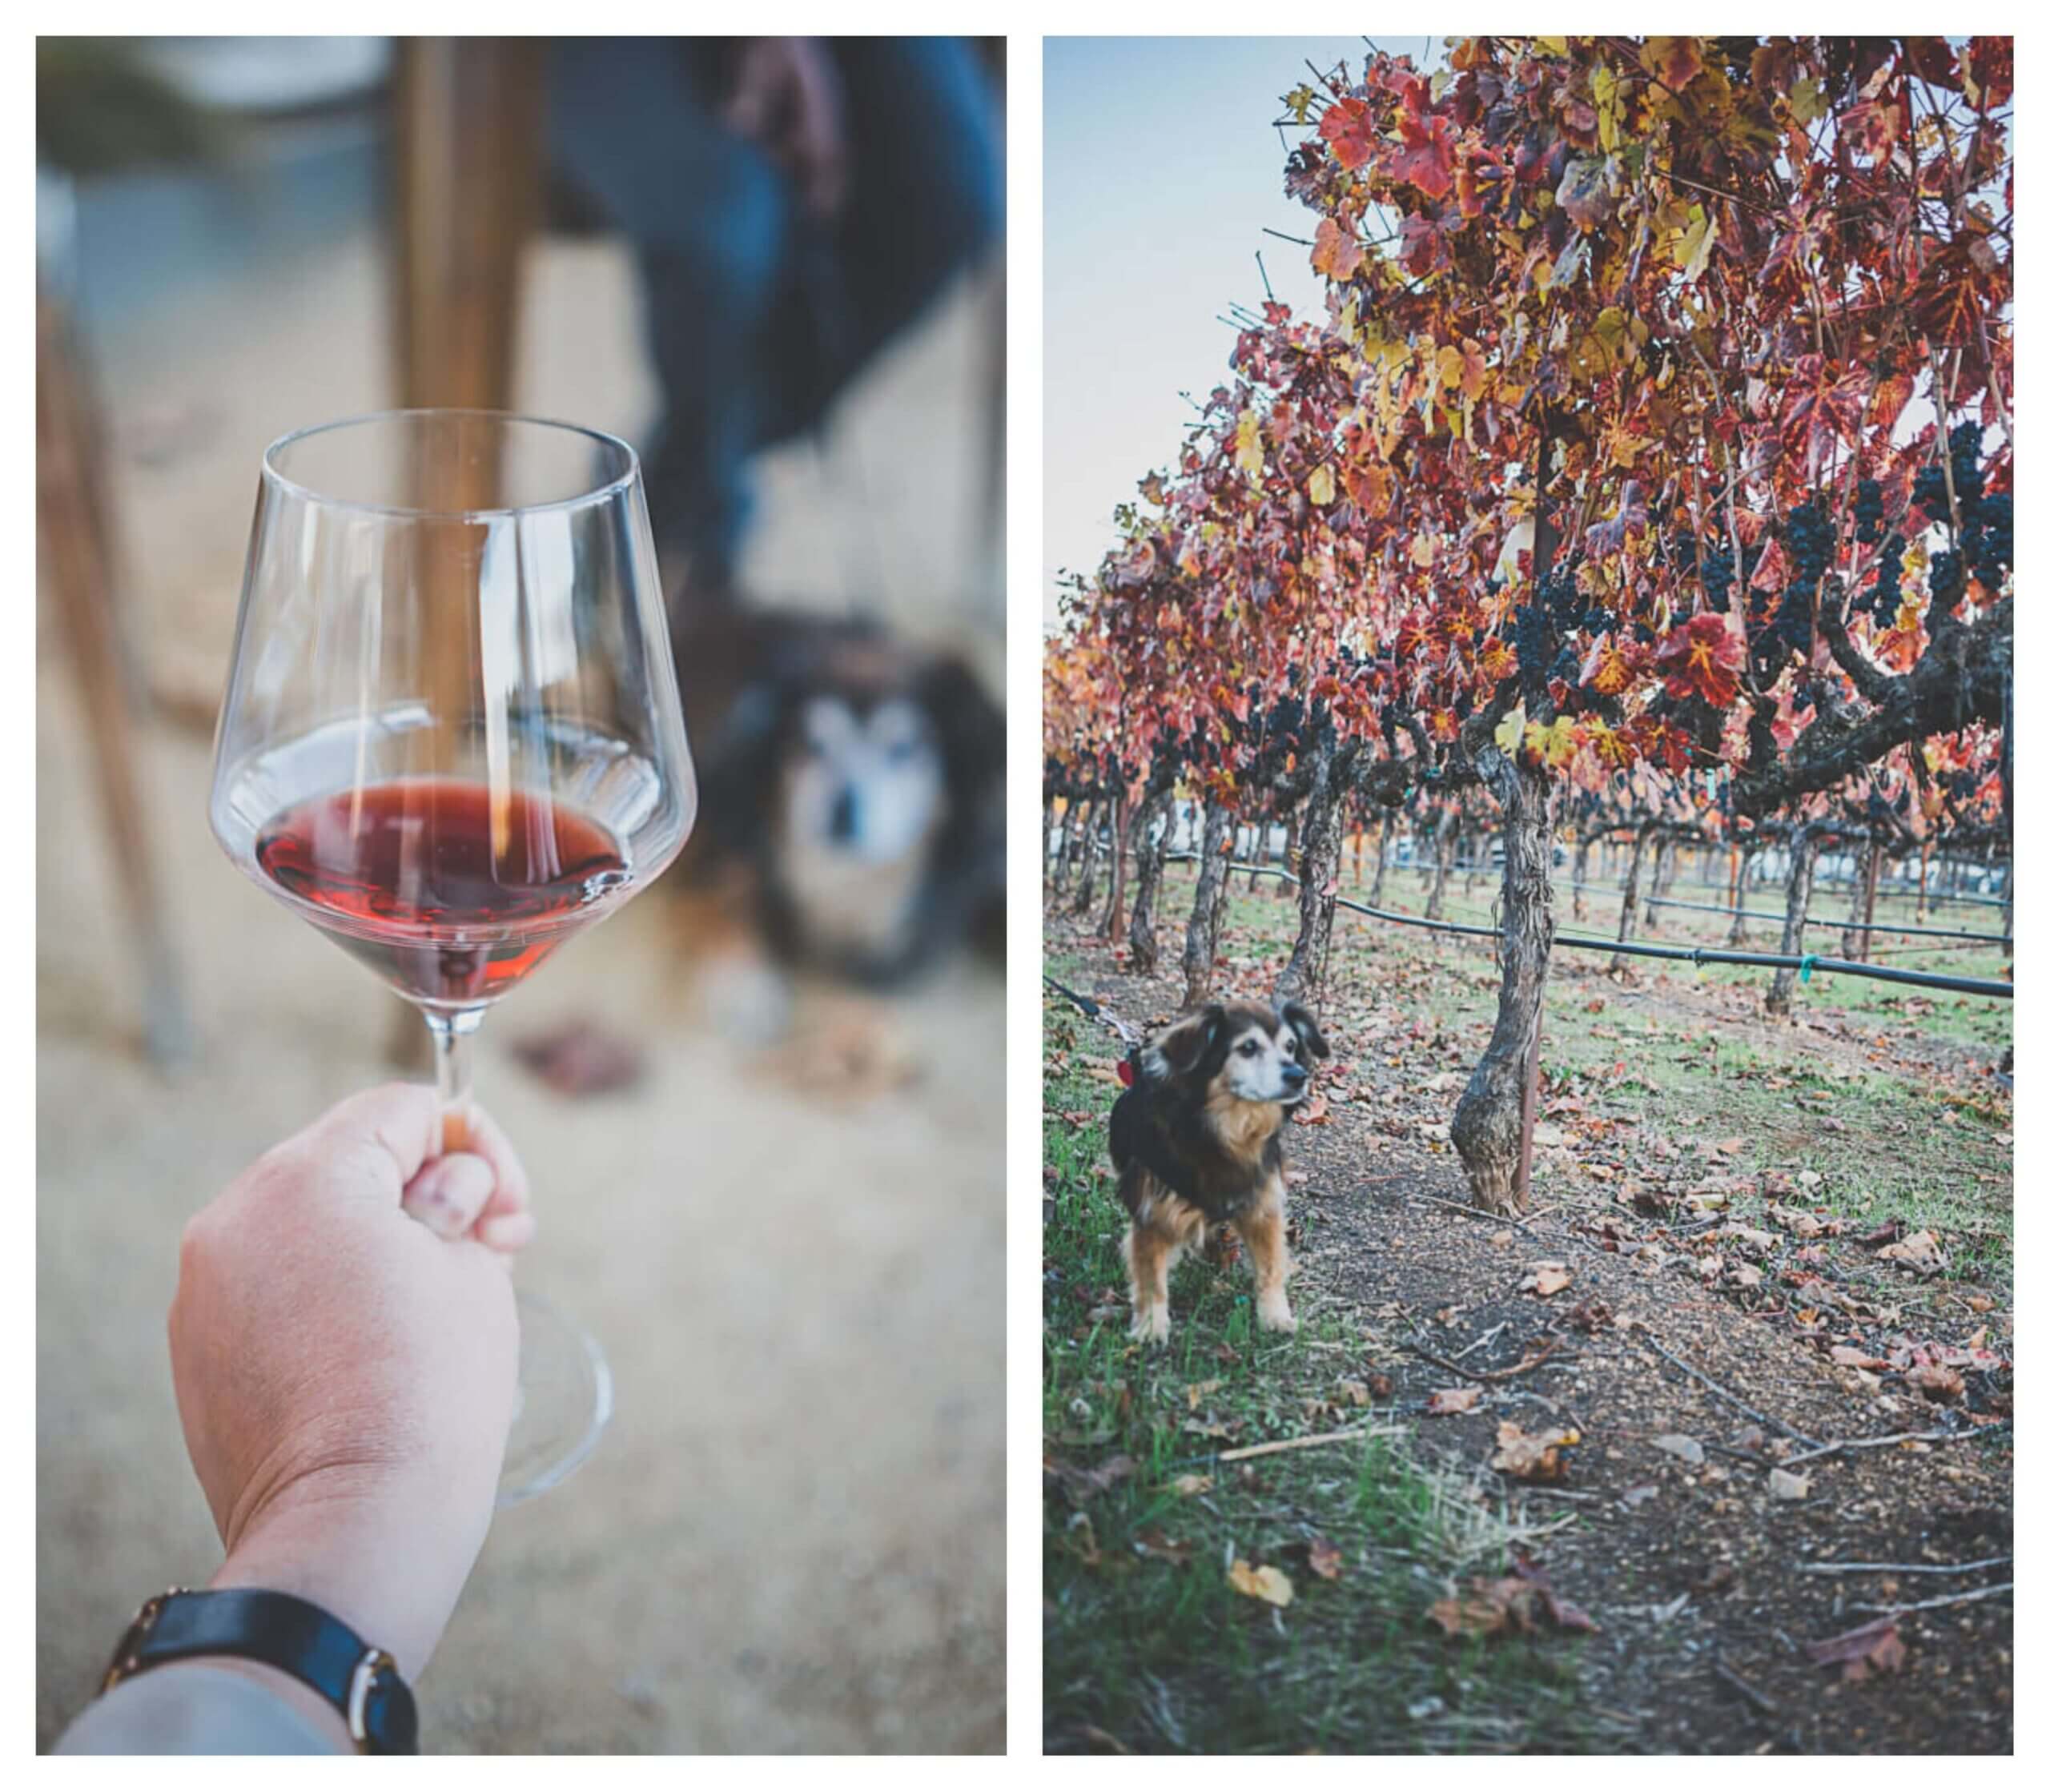 Dog friendly Russian Rivery valley wineries in Sonoma, MacRostie Winery